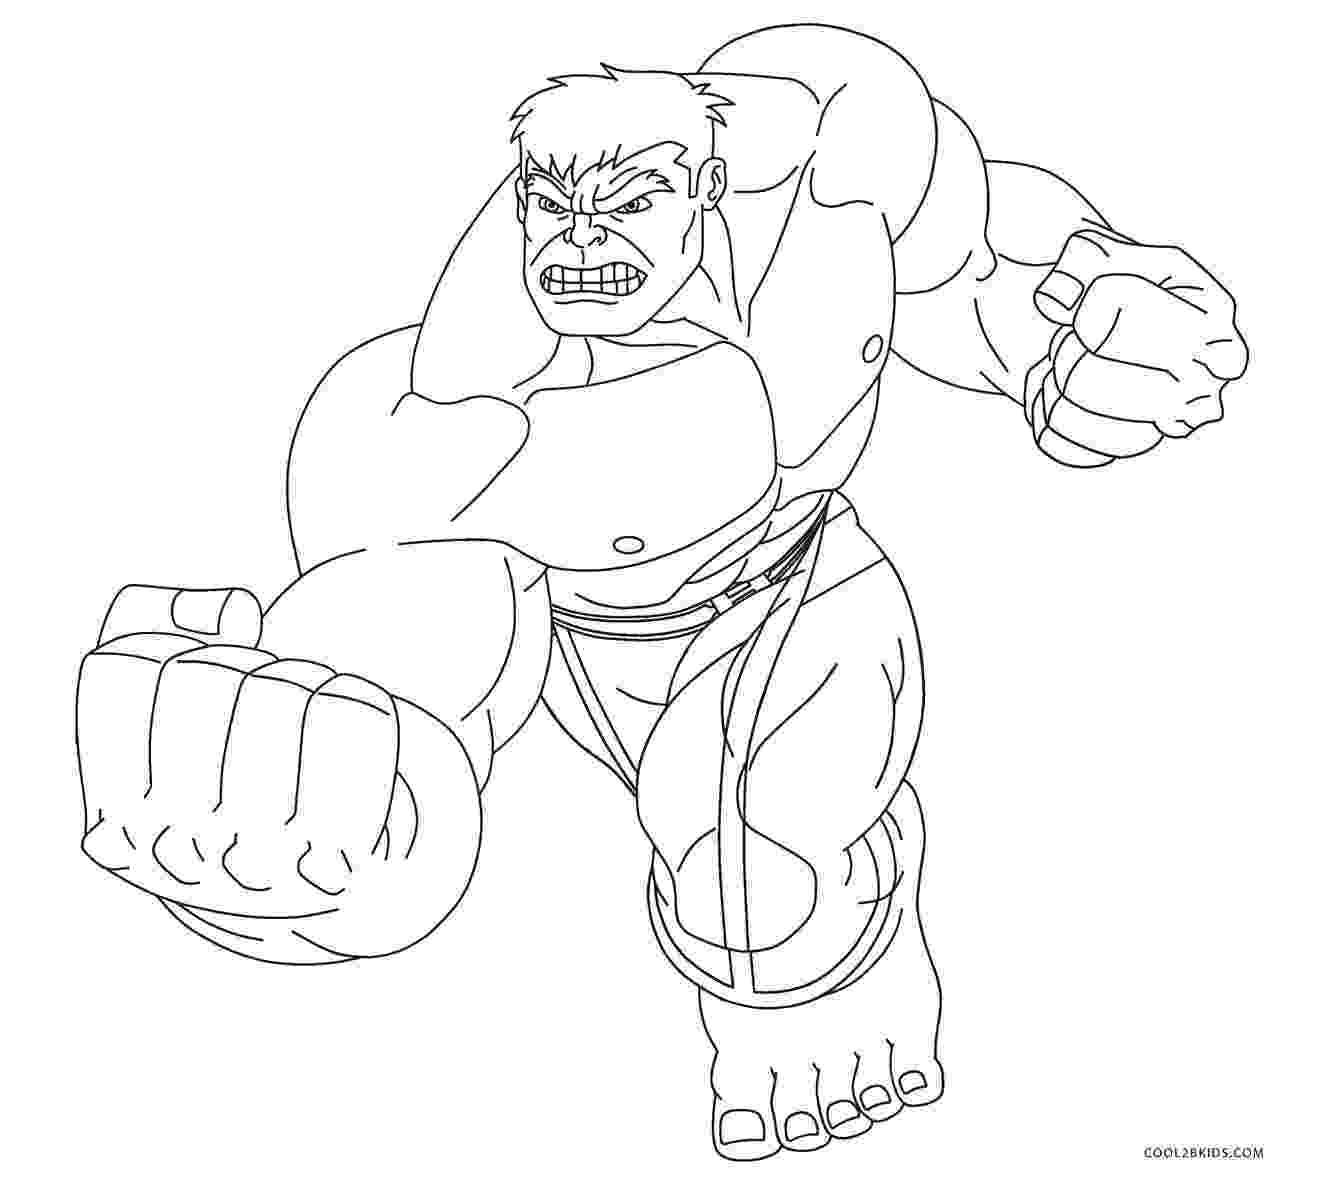 hulk colouring pictures hulk coloring pages lets coloring colouring hulk pictures 